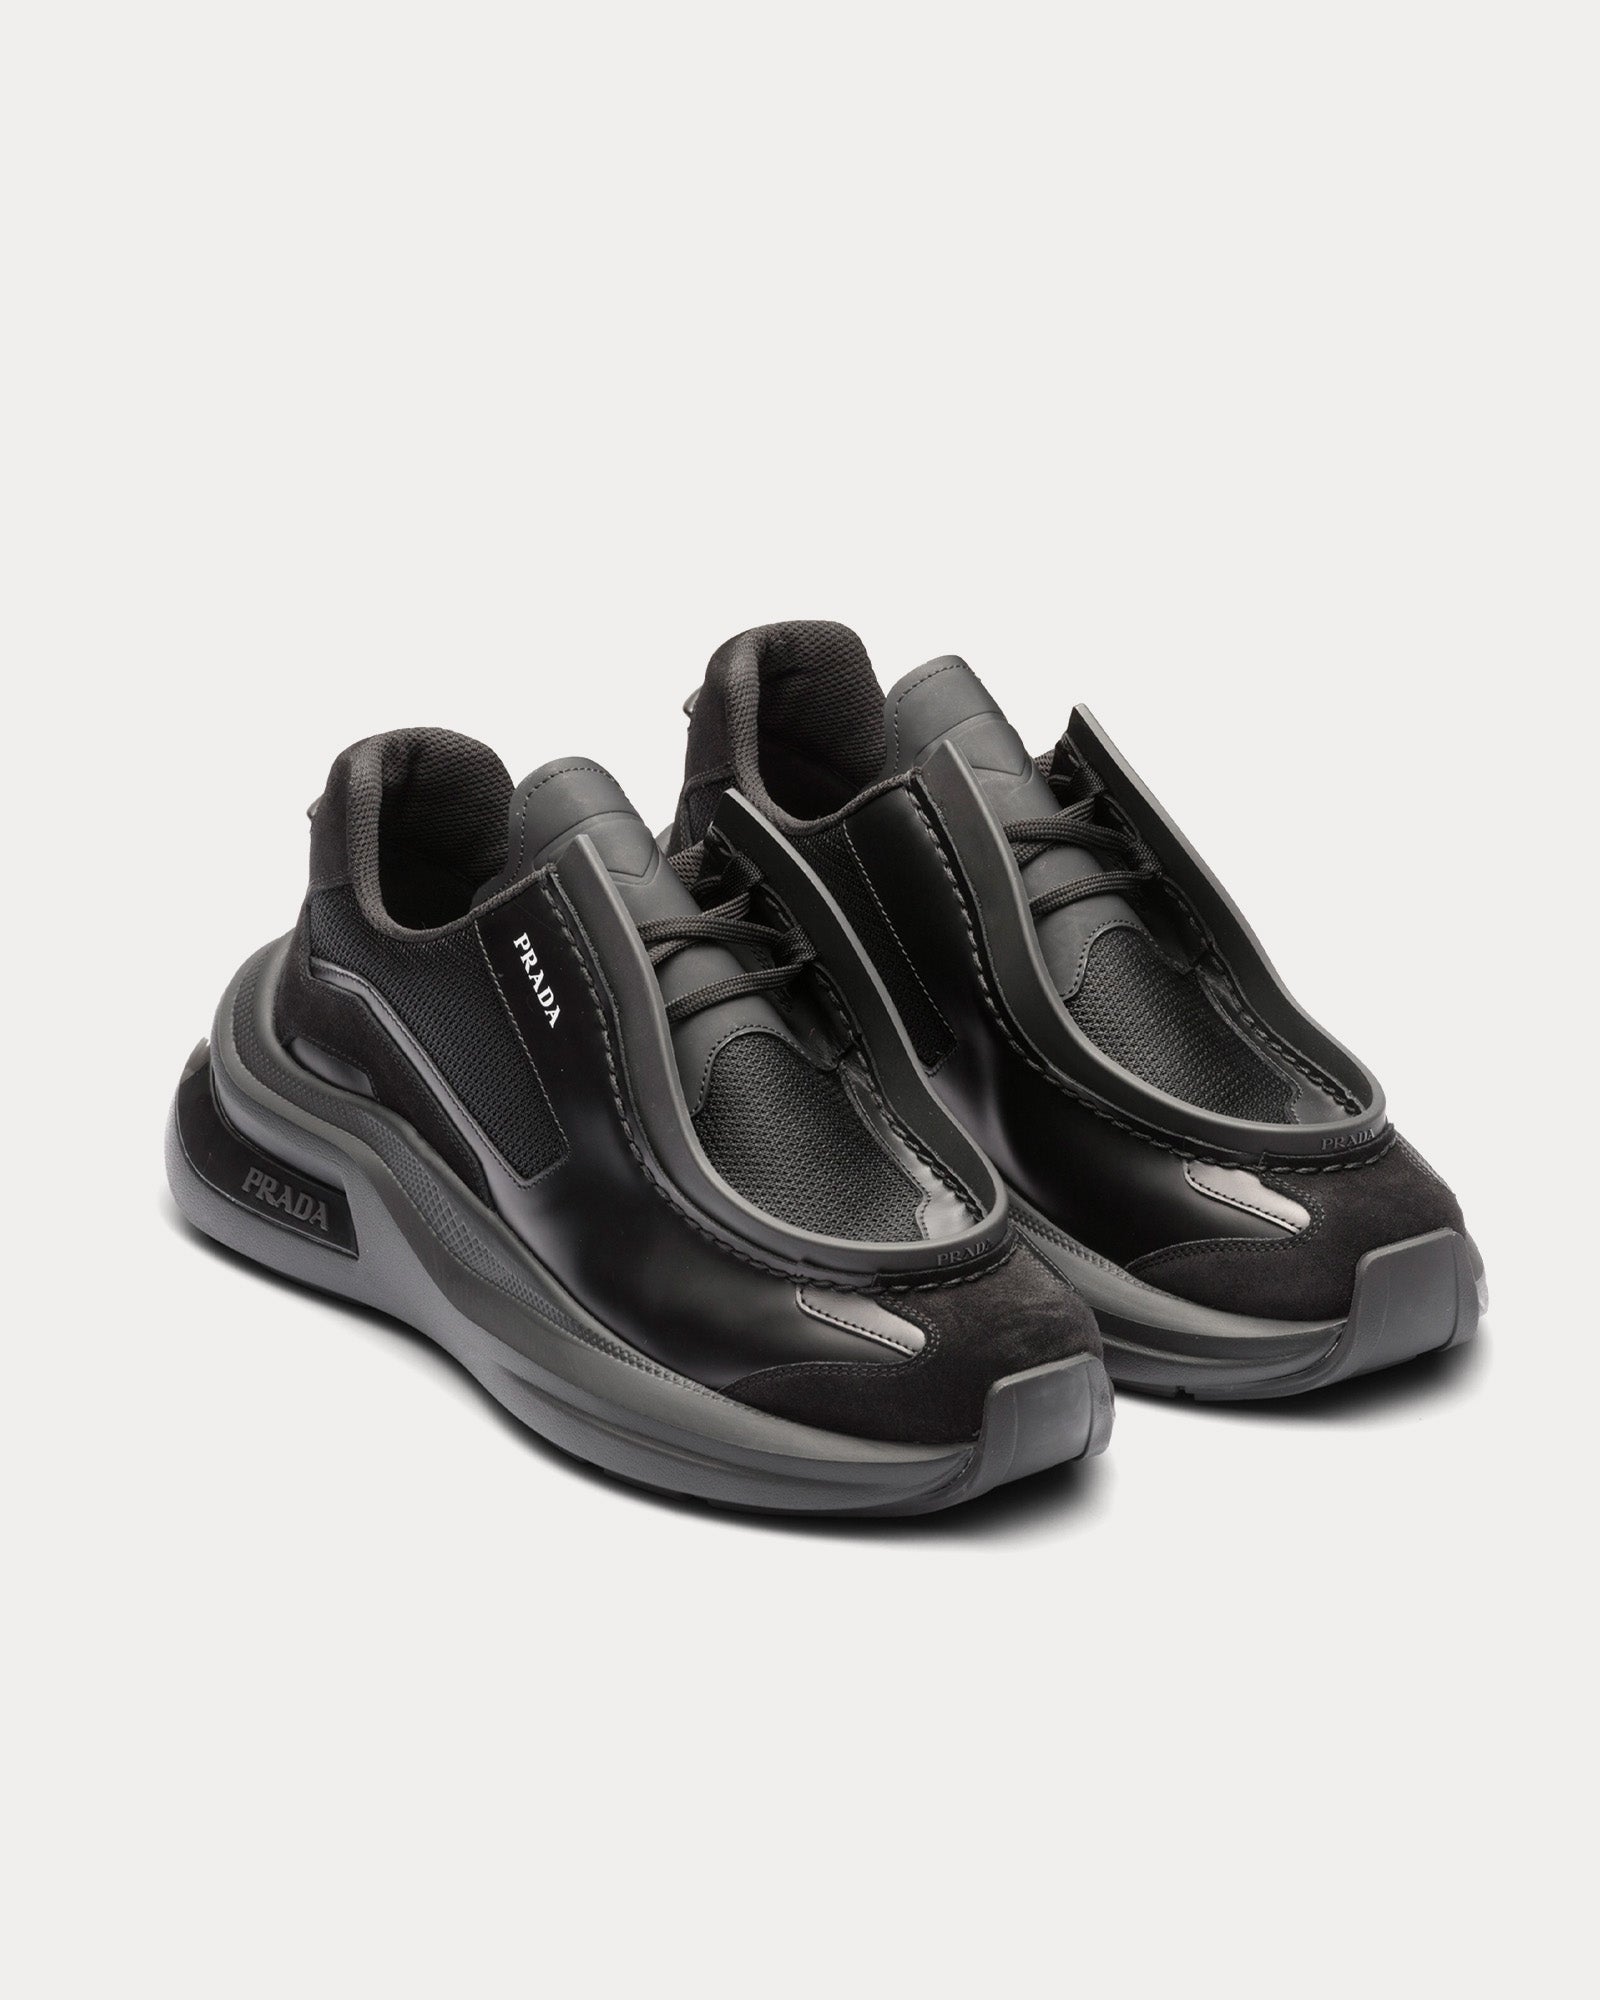 Prada - Systeme Brushed Leather with Bike & Suede Elements Black Low Top Sneakers